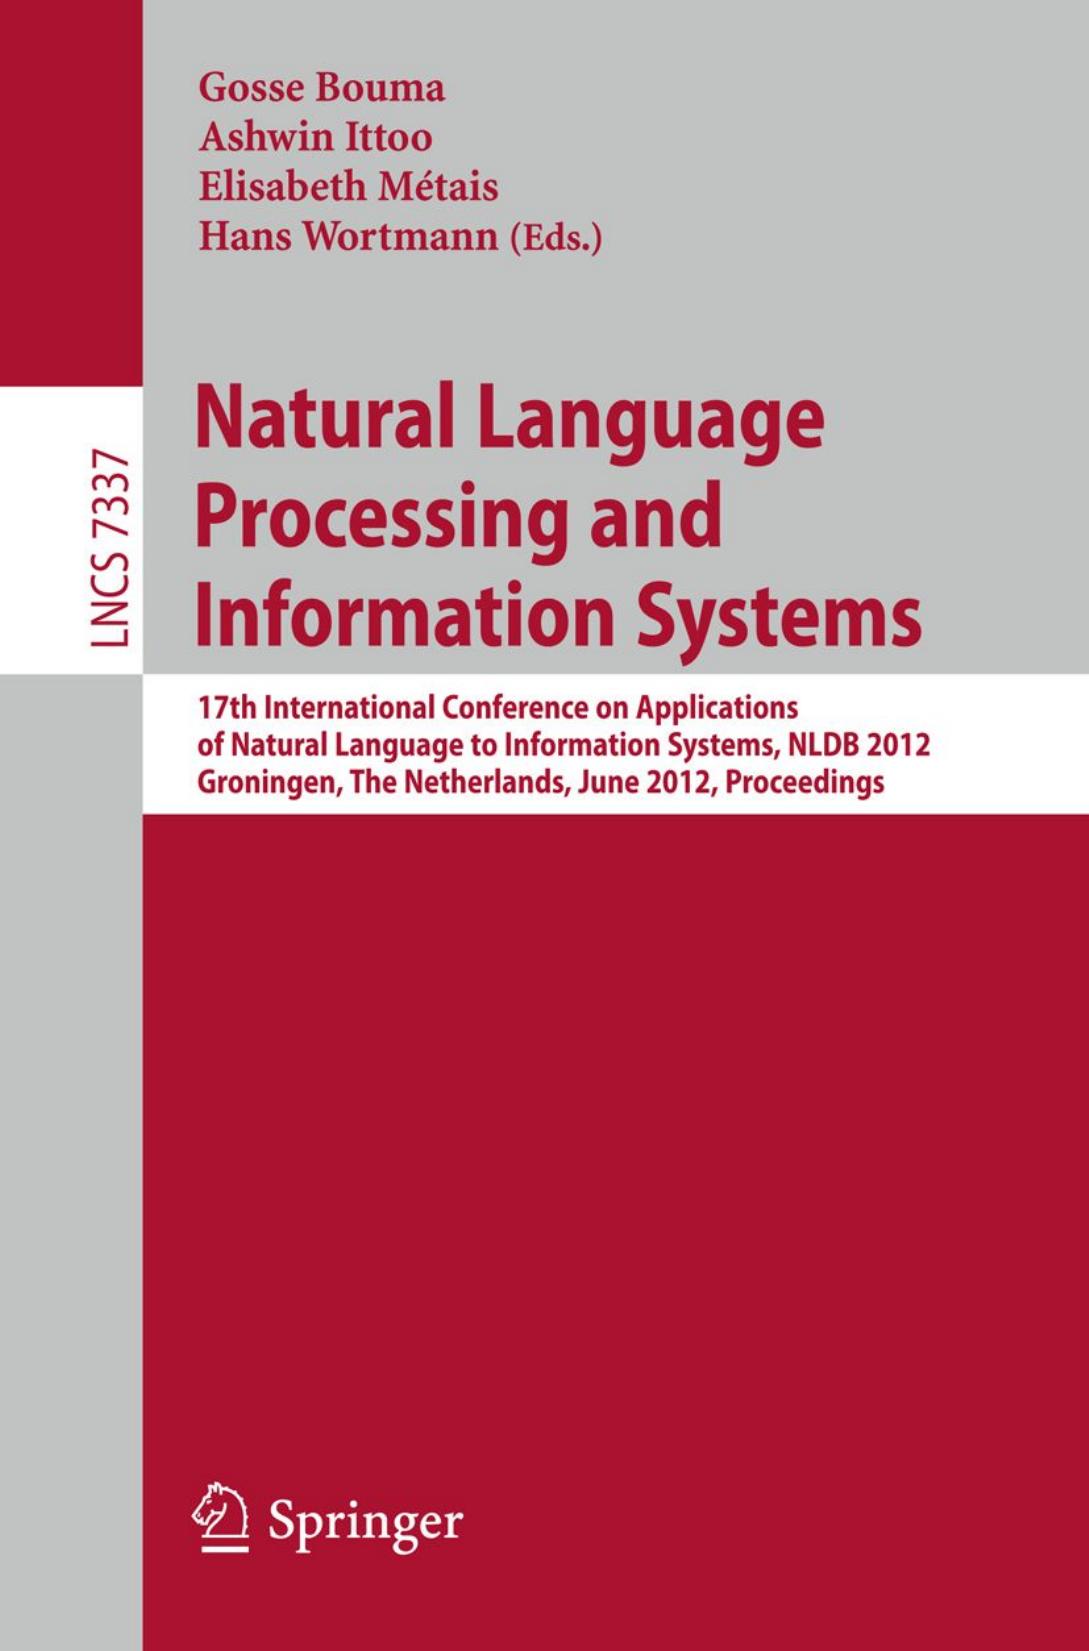 Natural Language Processing and Information Systems: 17th International Conference on Applications of Natural Language to Information Systems, NLDB 2012, Groningen, the Netherlands, June 26-28, 2012. Proceedings